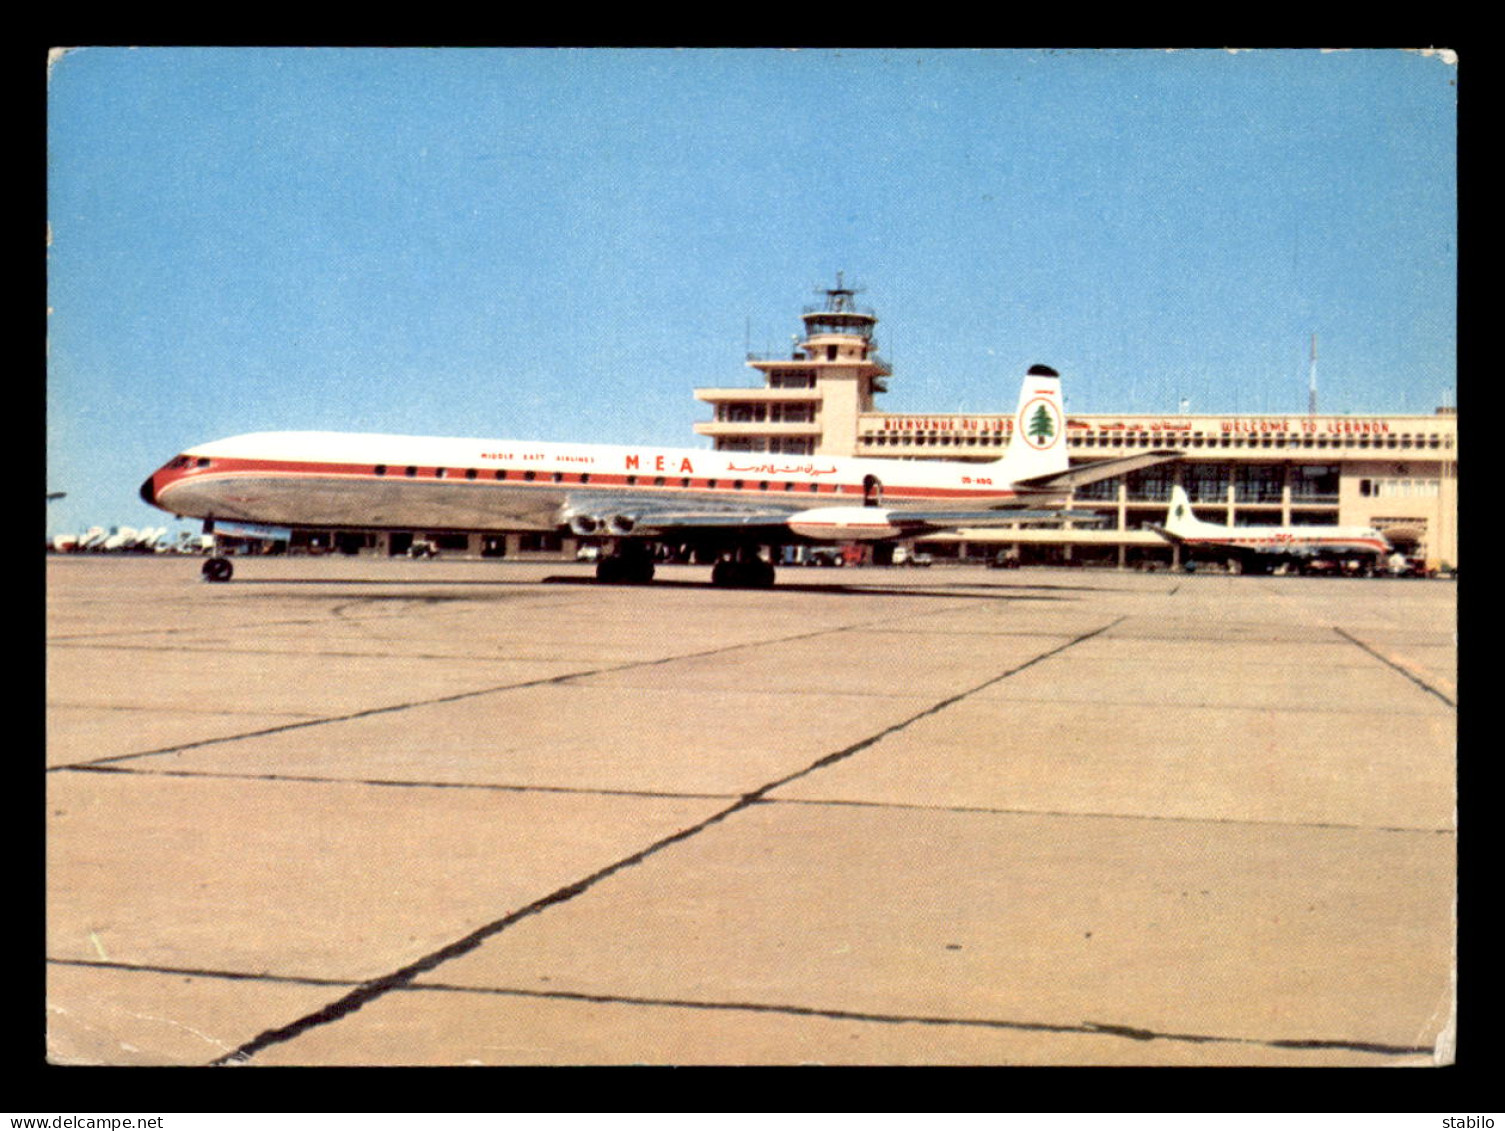 LIBAN - BEYROUTH - AIRPORT INTERNATIONAL - A MIDDLE EAST AIRLINES CIE MEA - AVION COMET 4C - Liban